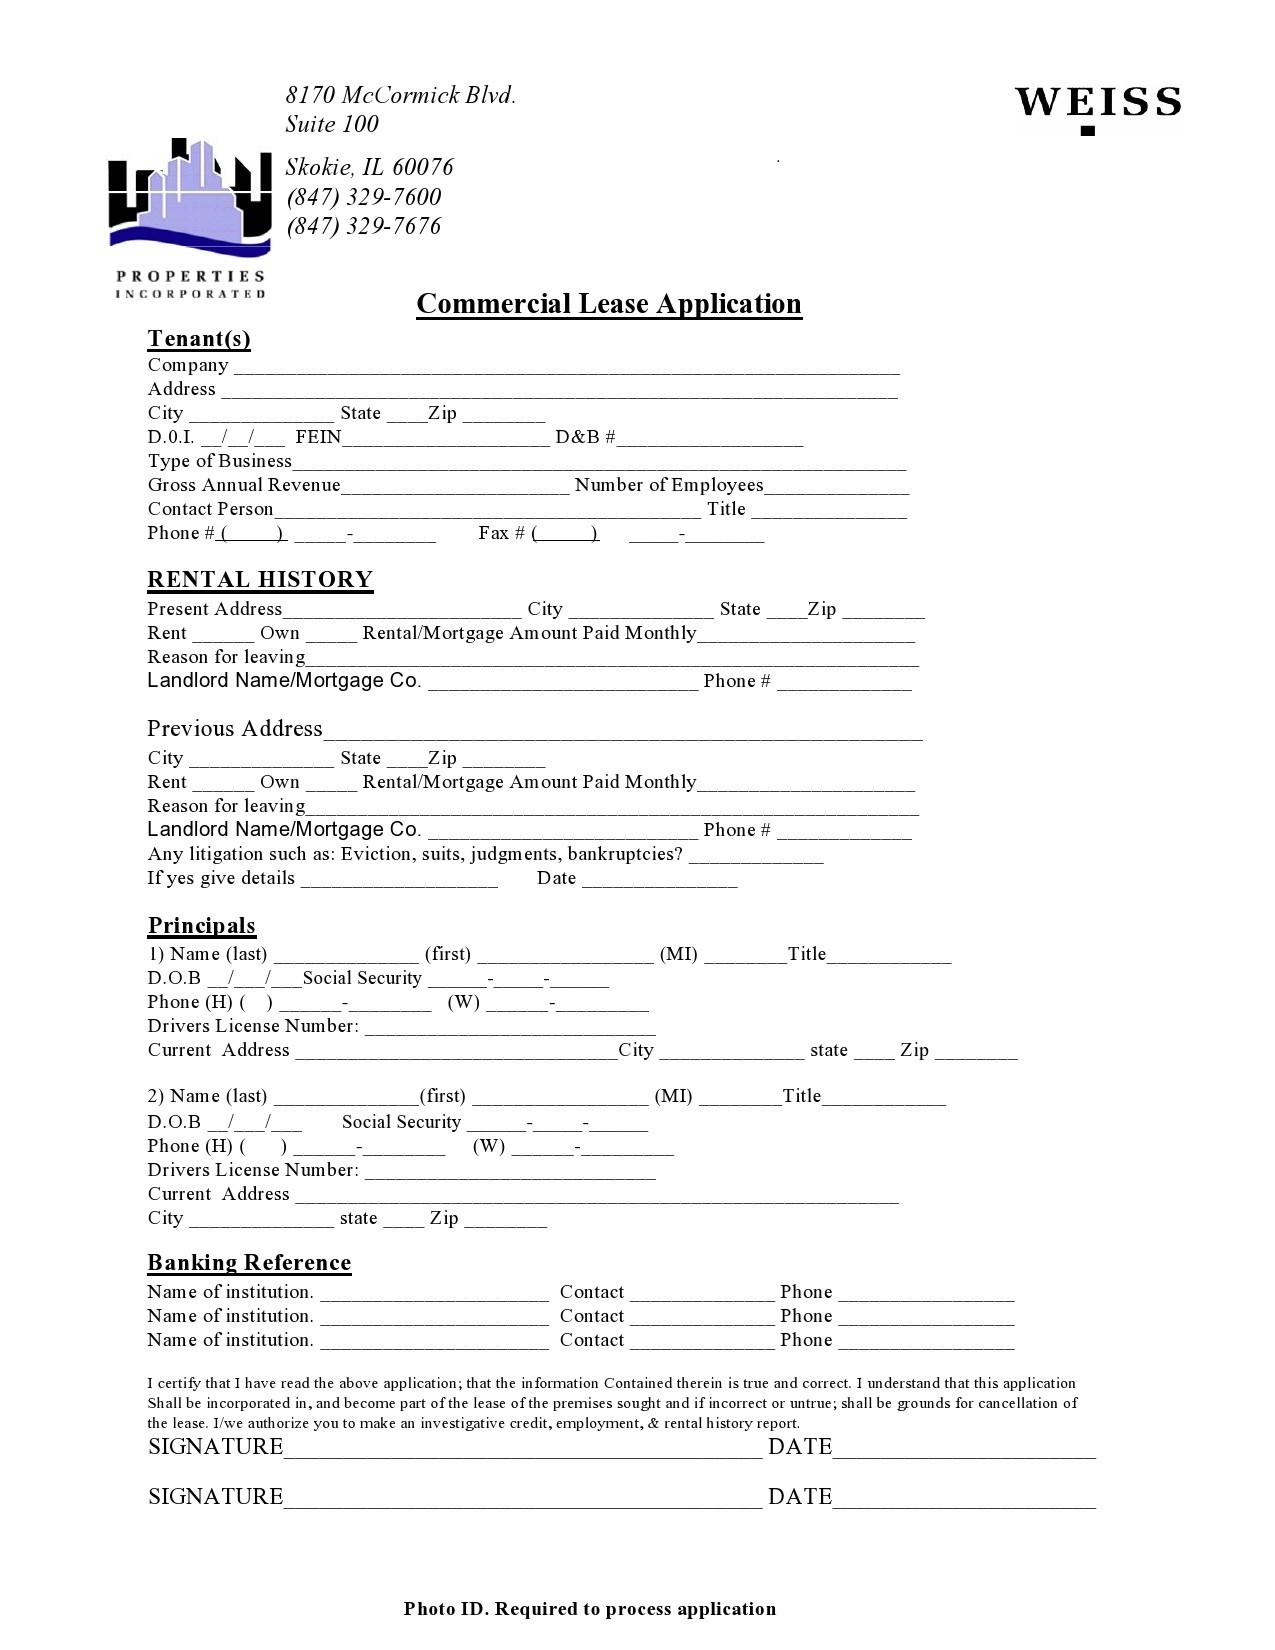 Free commercial lease application 32